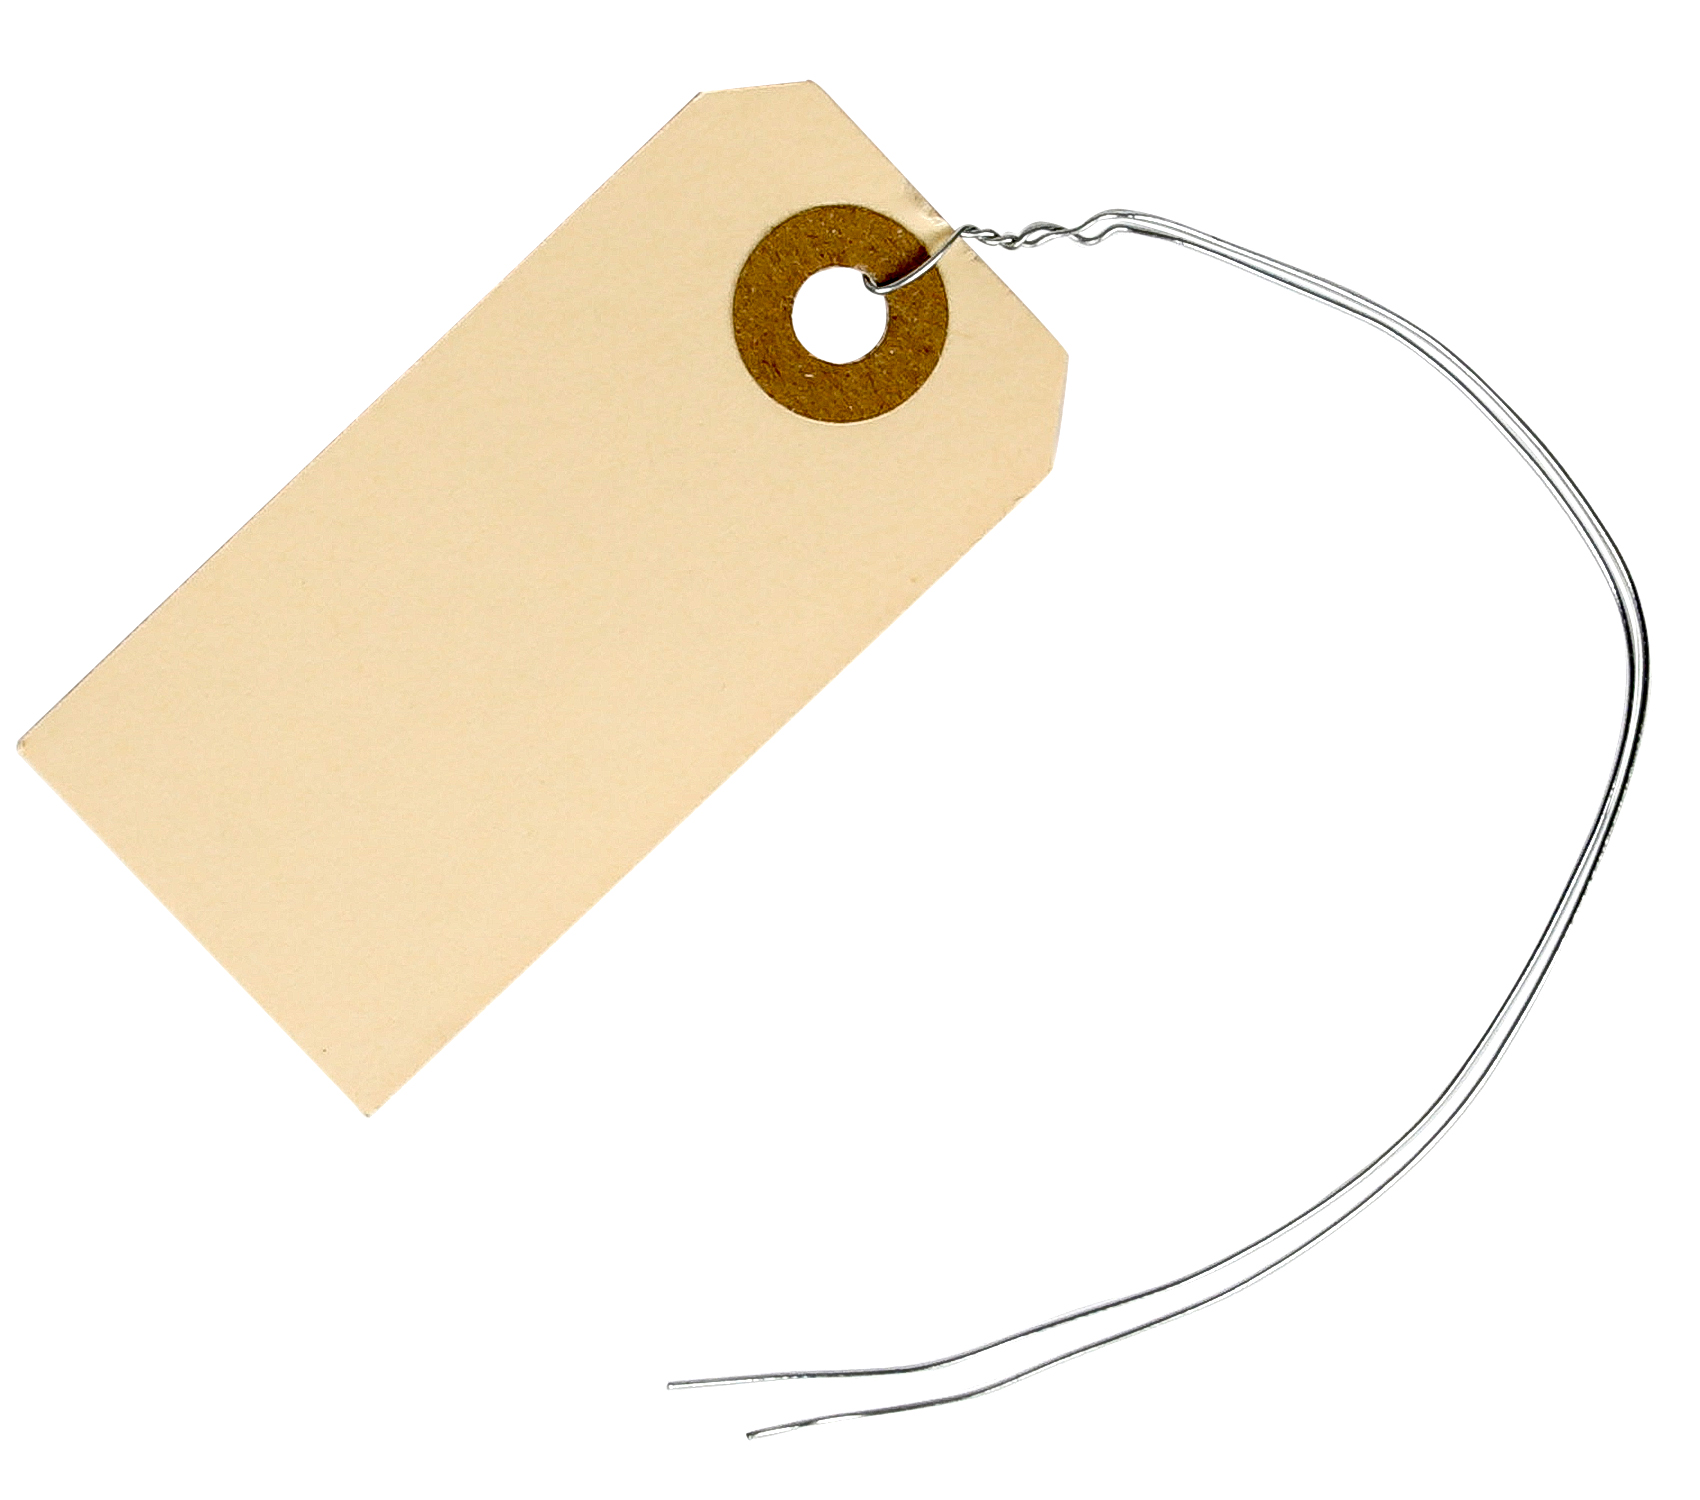 Numbered Manila 3 Part Layaway Tags 100 count 6-1/4" x 3-1/8" Reinforced String 